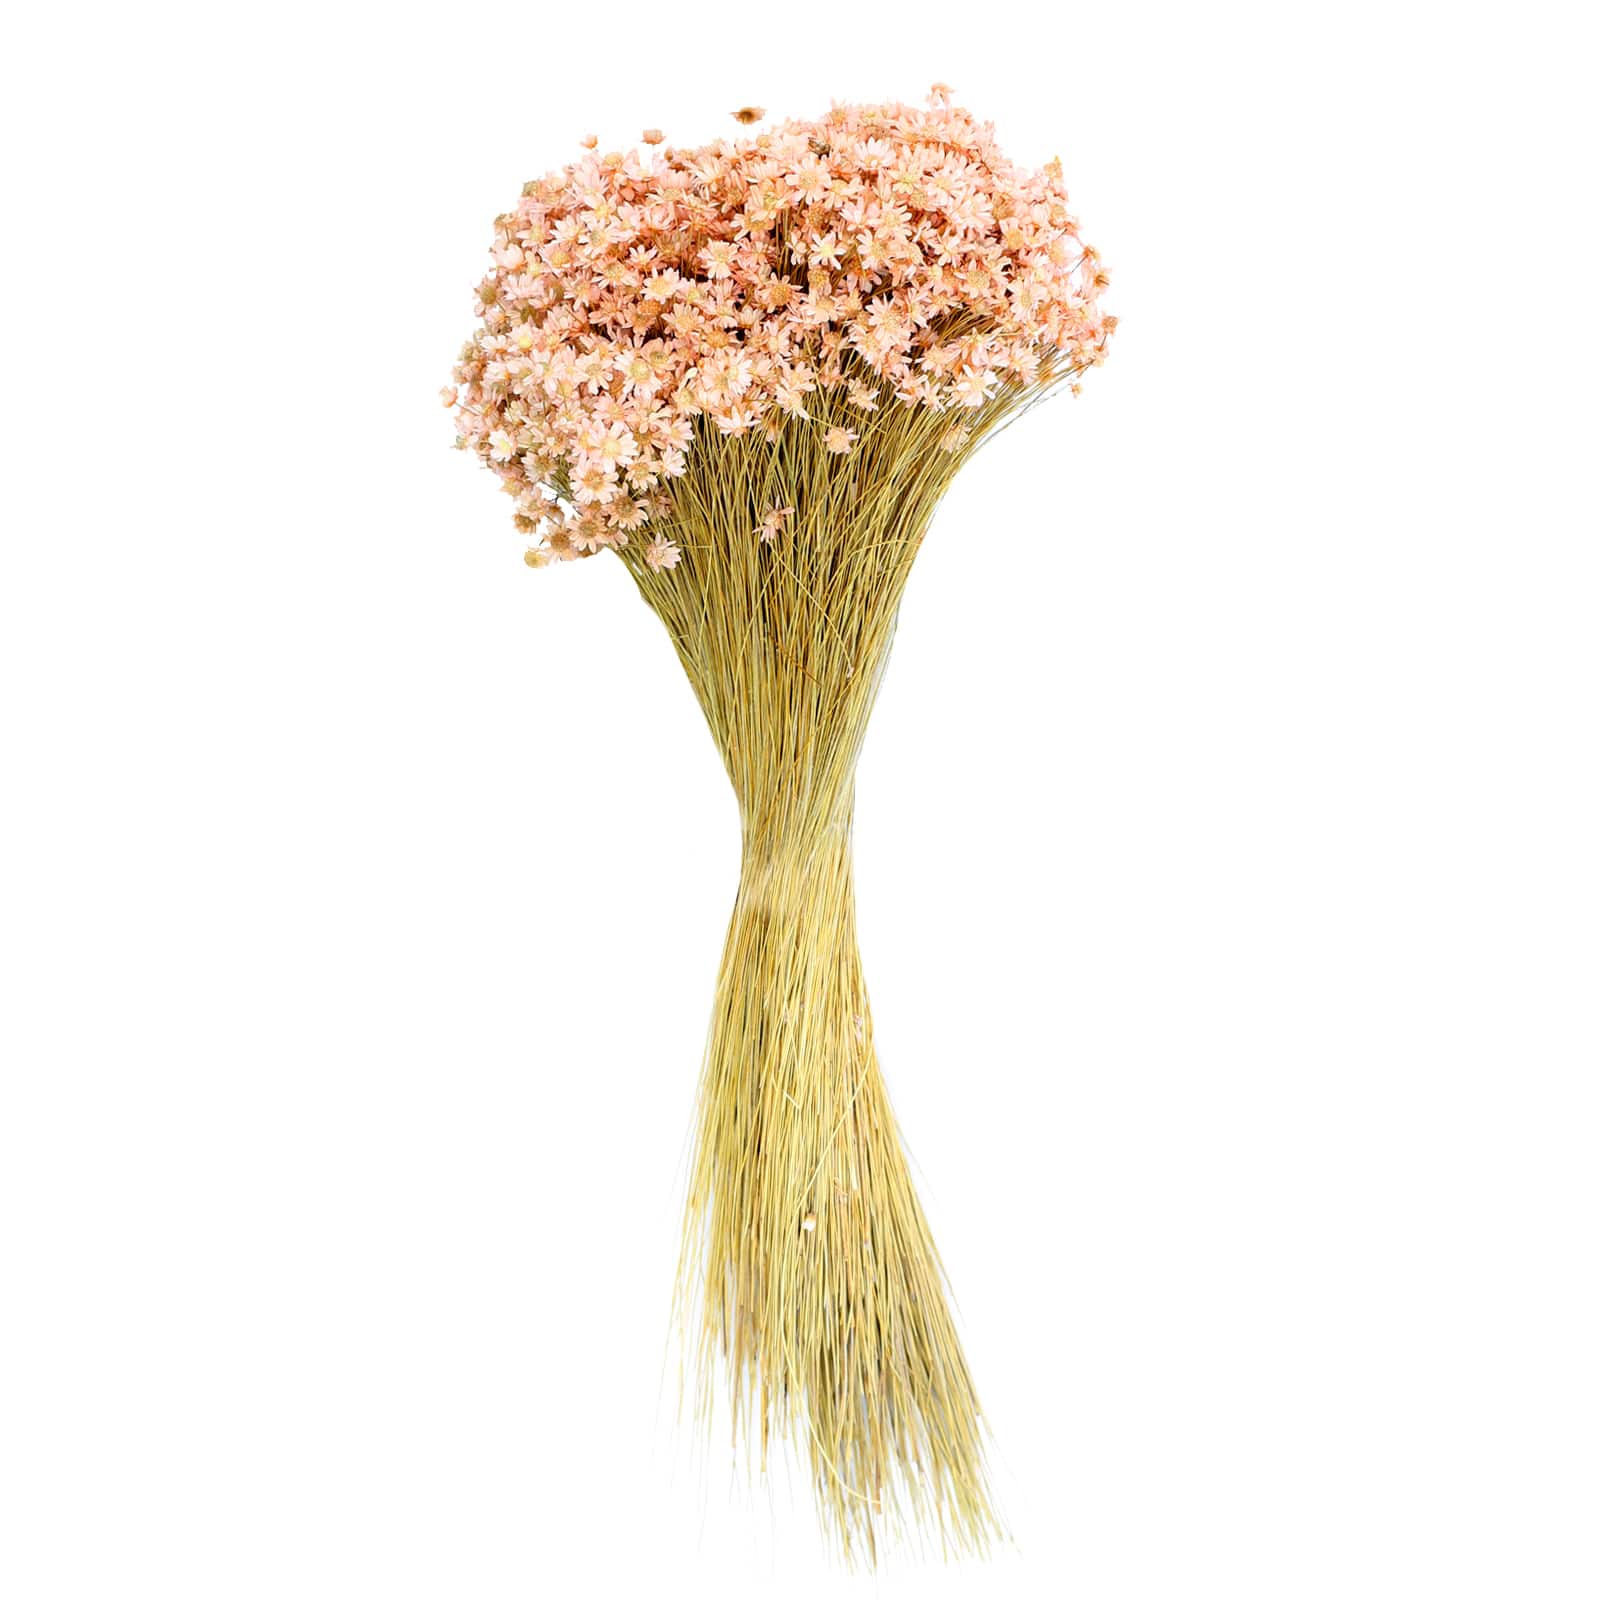 60Pcs Dried Bunny Tail Grass Small Natural Dry Grass Dried Pink Flowers  Bouquet Wedding Dry Flower Bunch for Home Garden Party Decor Flower